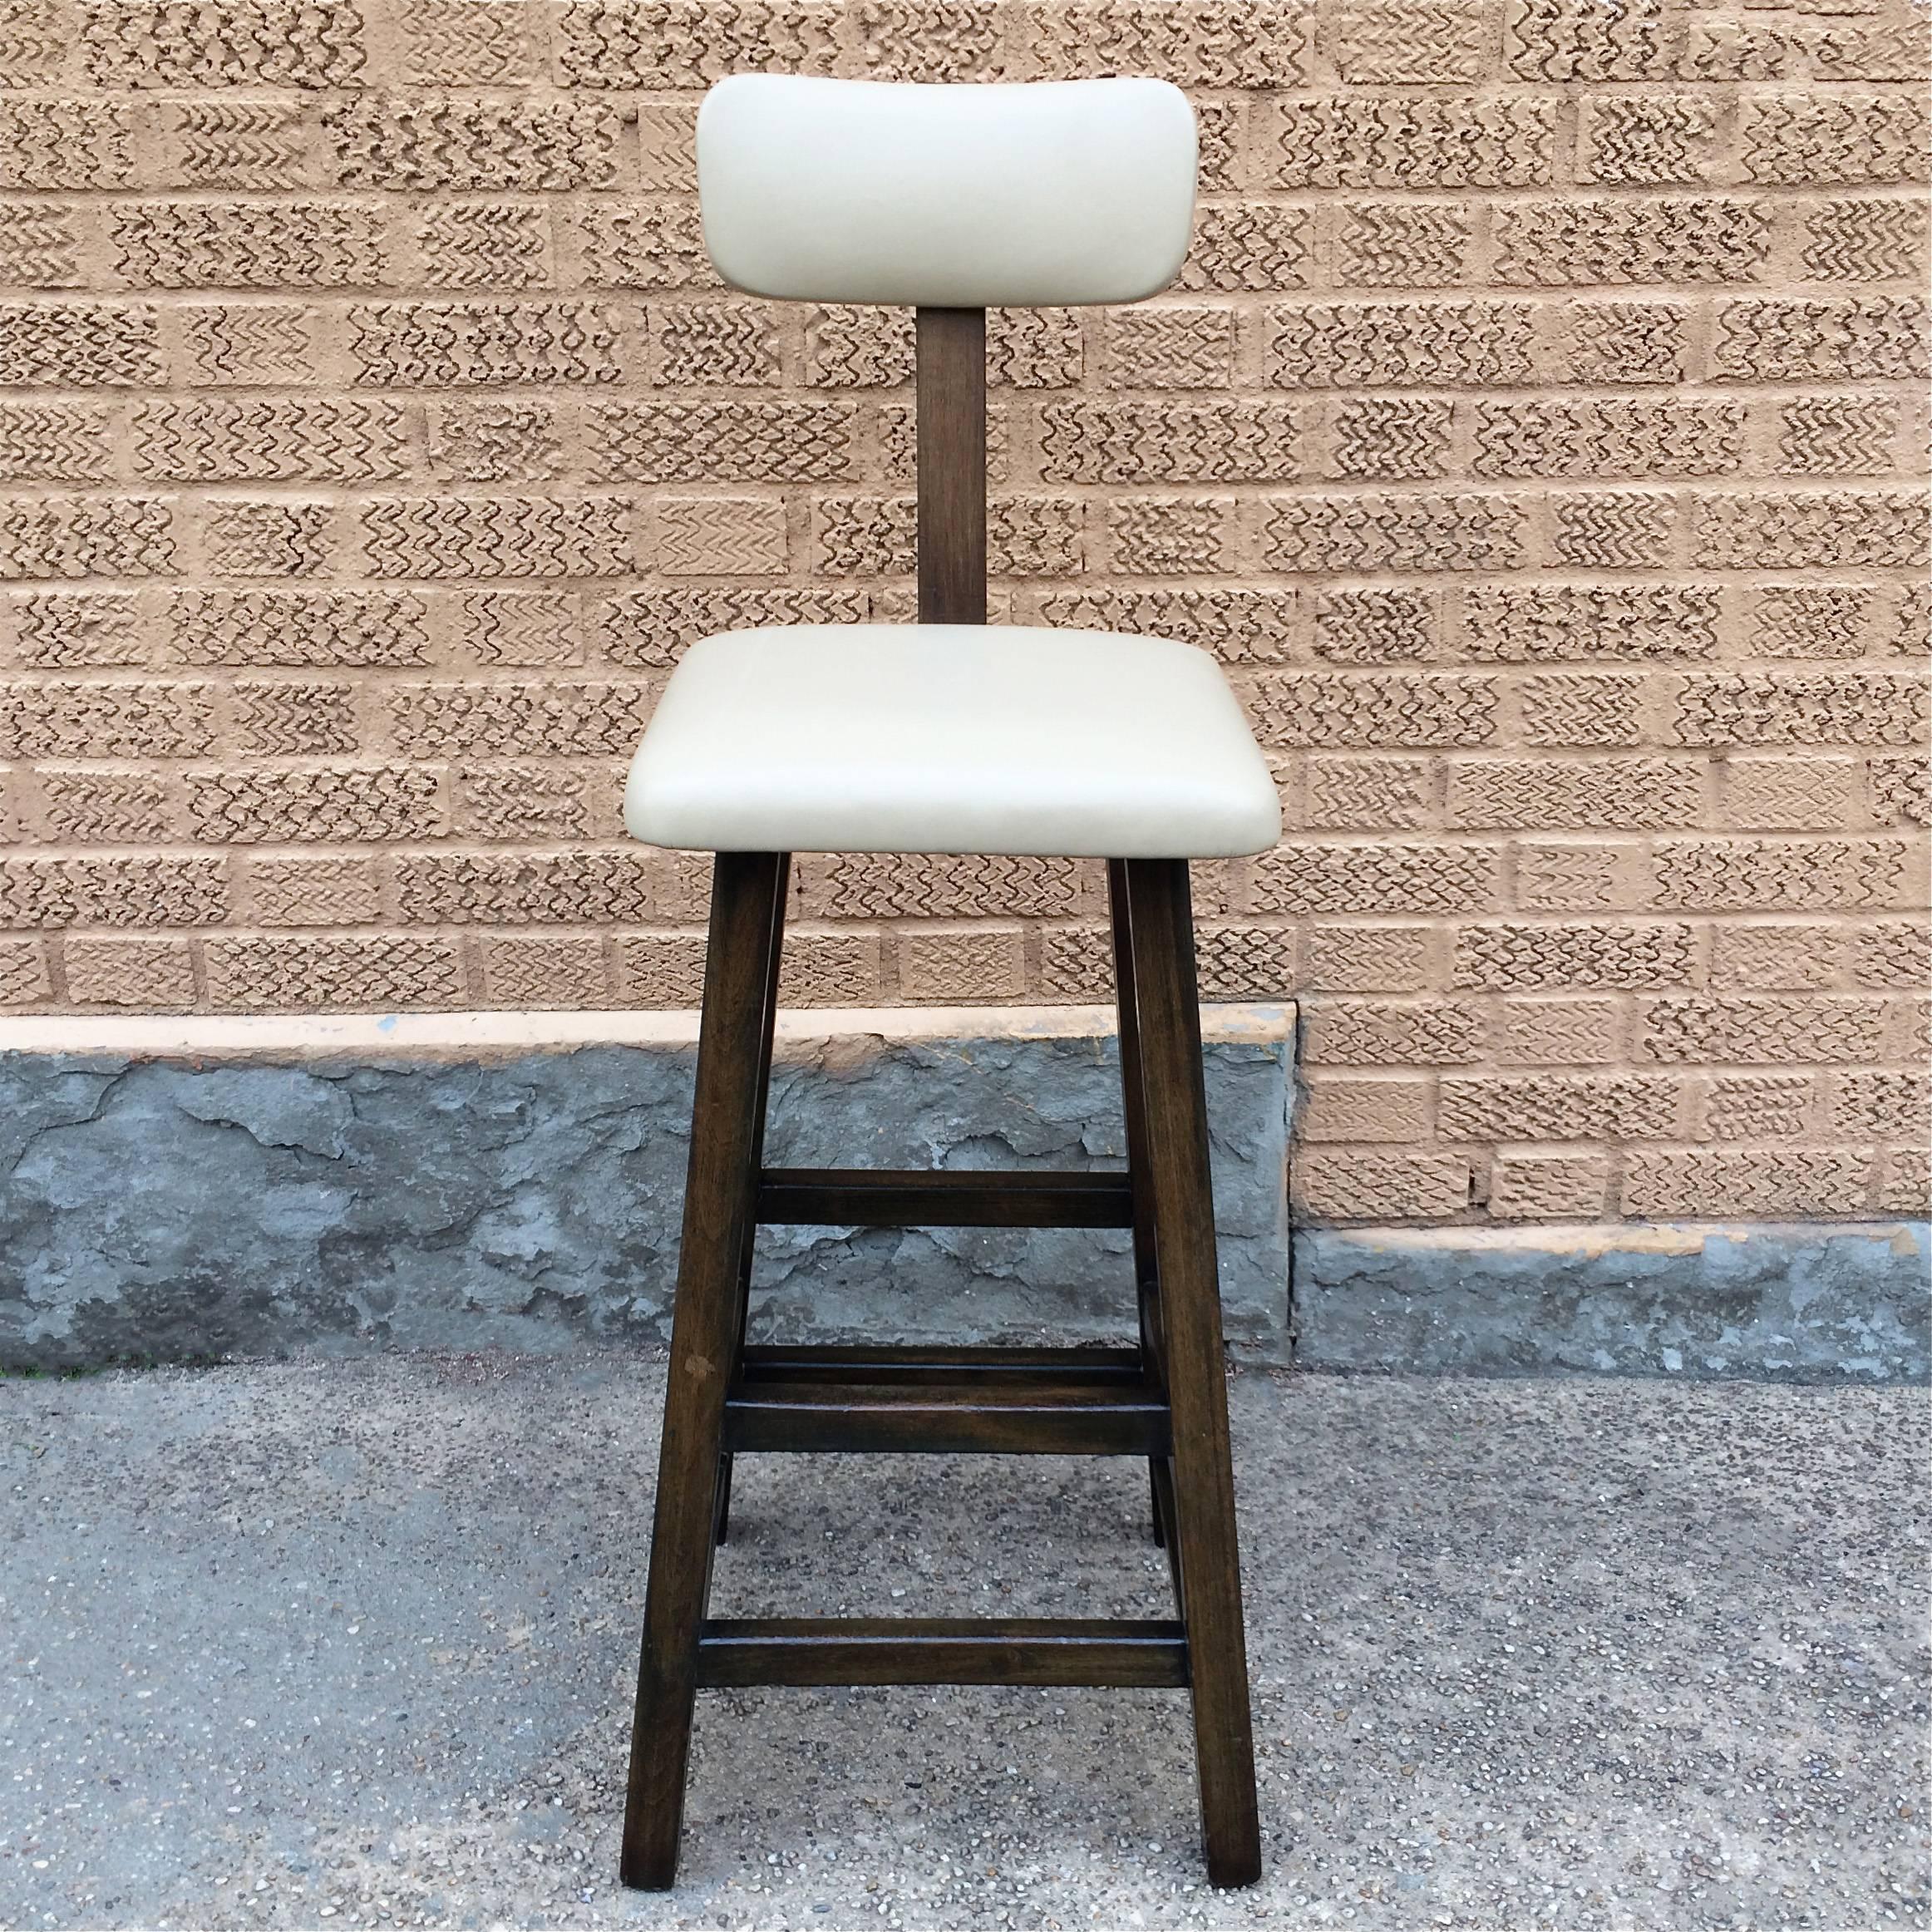 Single, tall, Arts & Crafts, shop stool features an ebonized maple frame with ecru leather seat and back circa 1930s. Backrest is height adjustable.